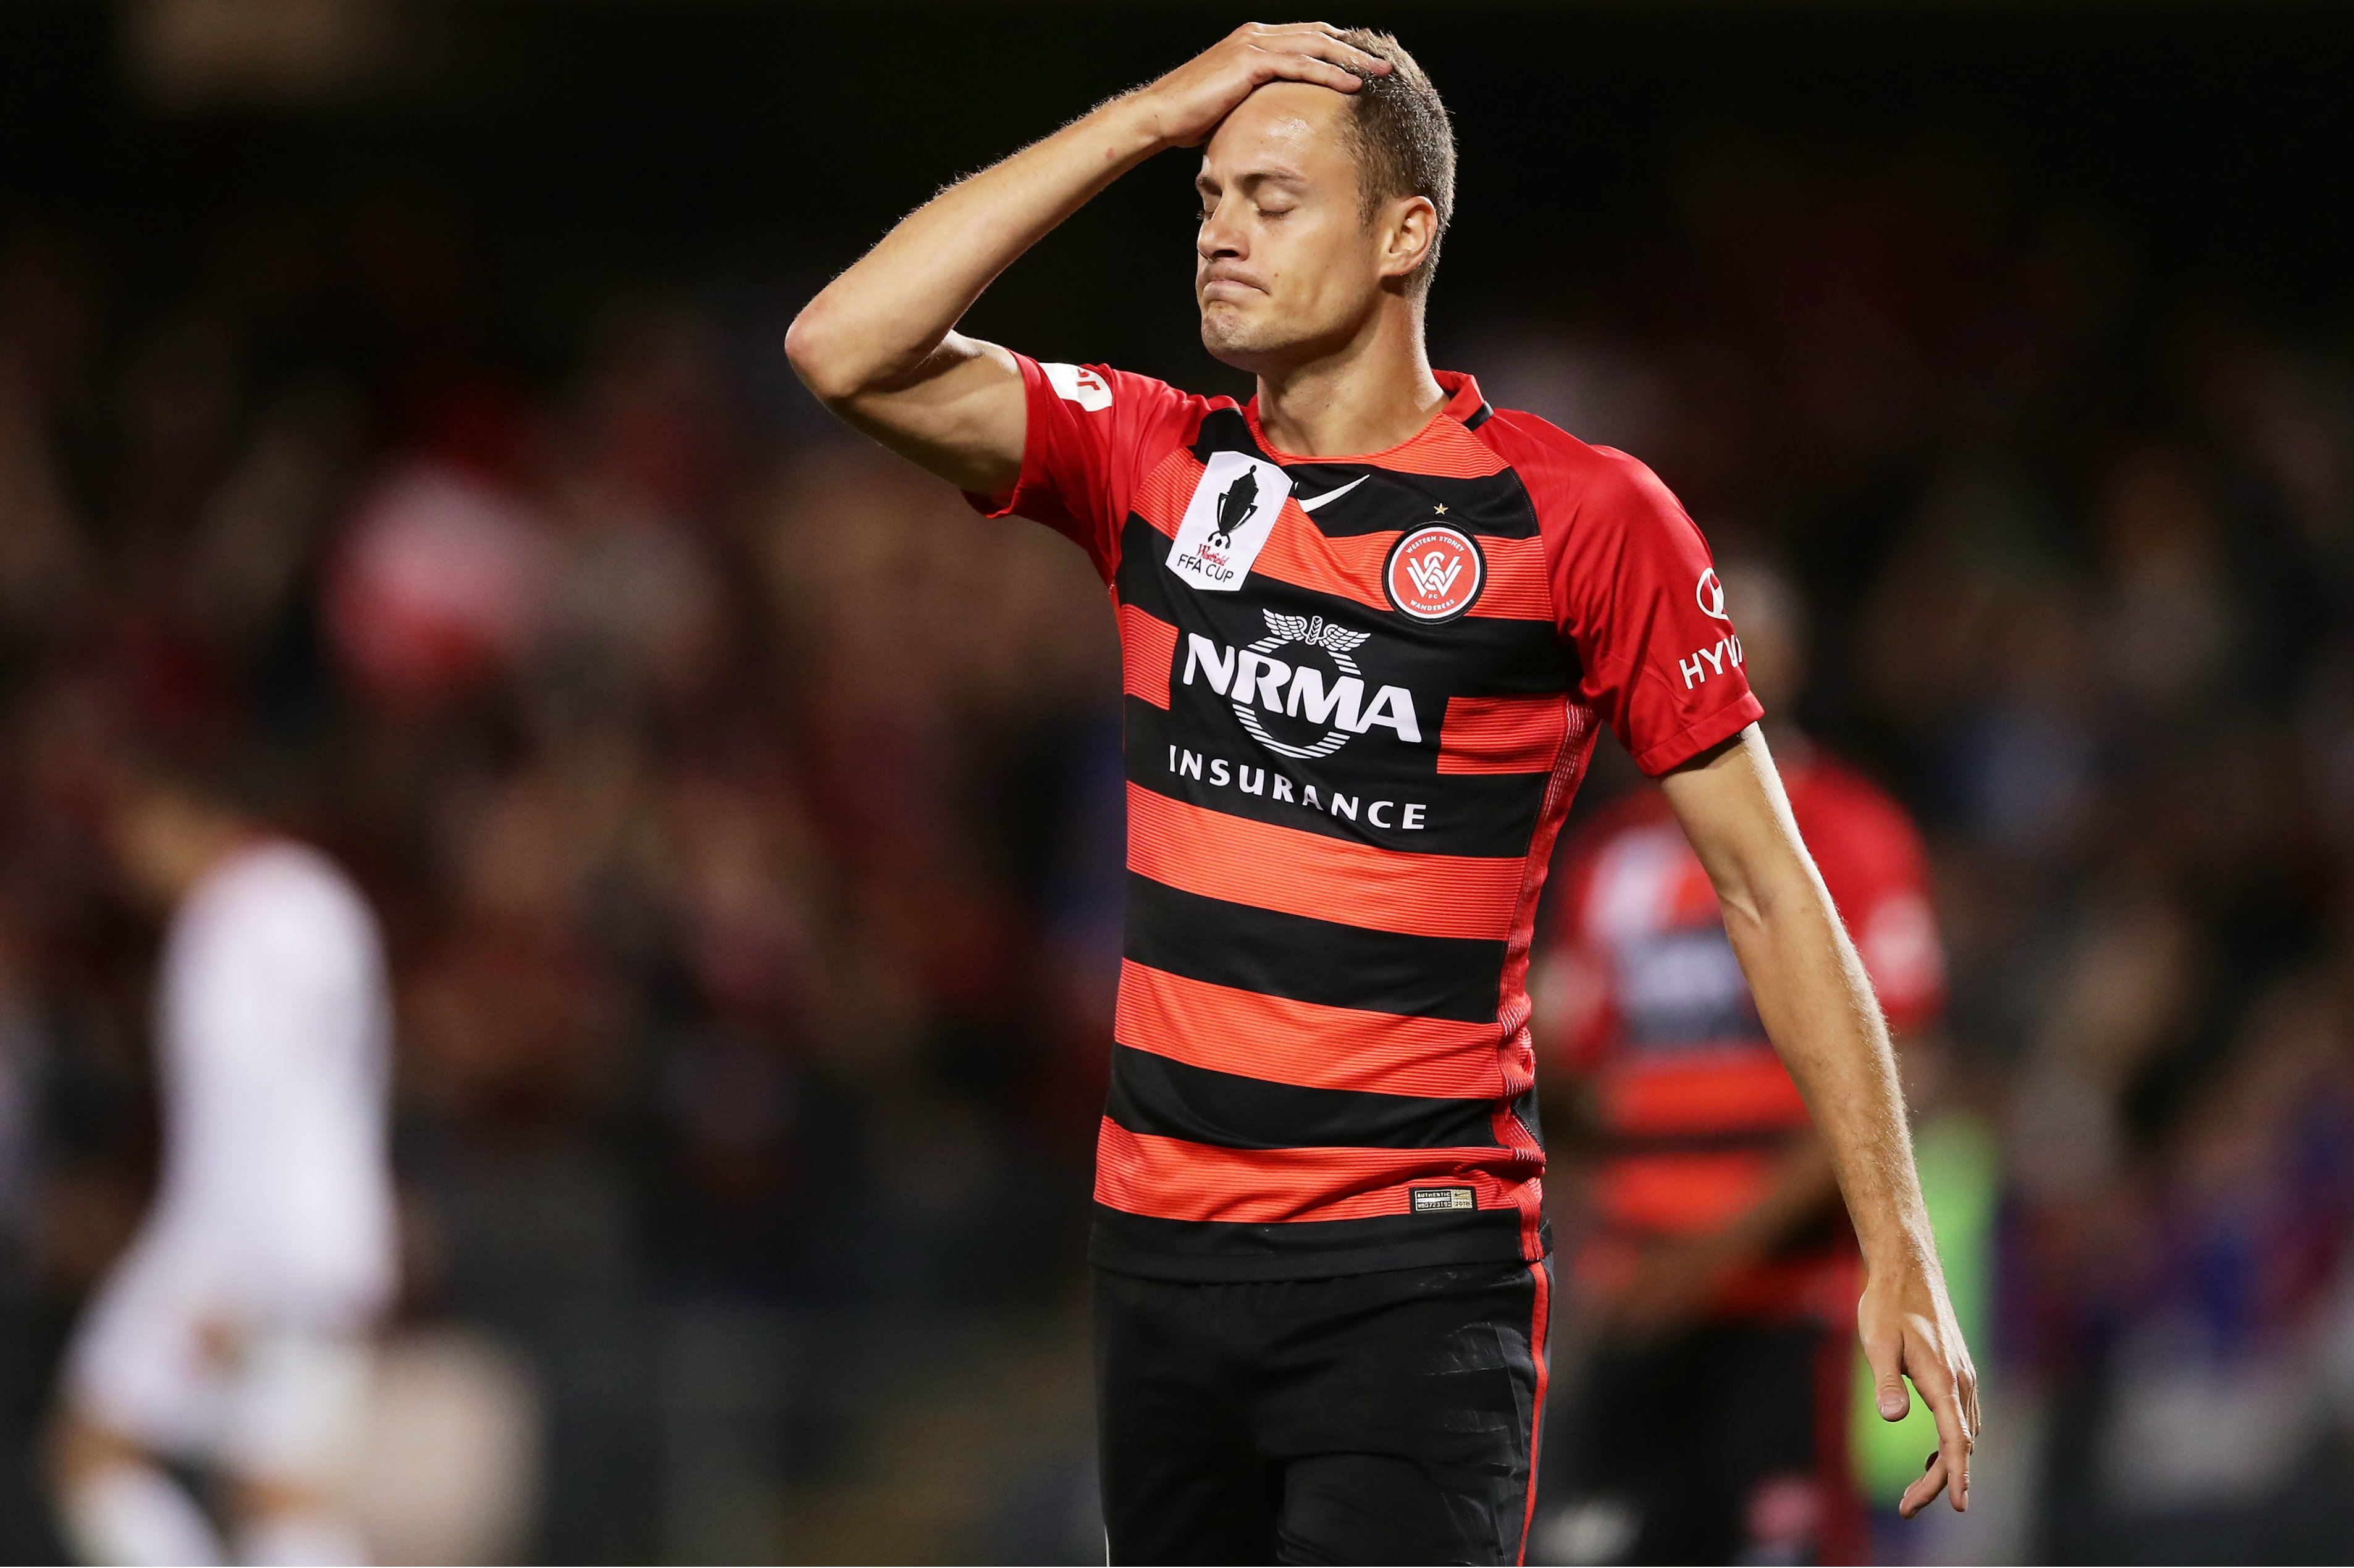 A disappointed Oriol Riera after missing a chance for the Wanderers